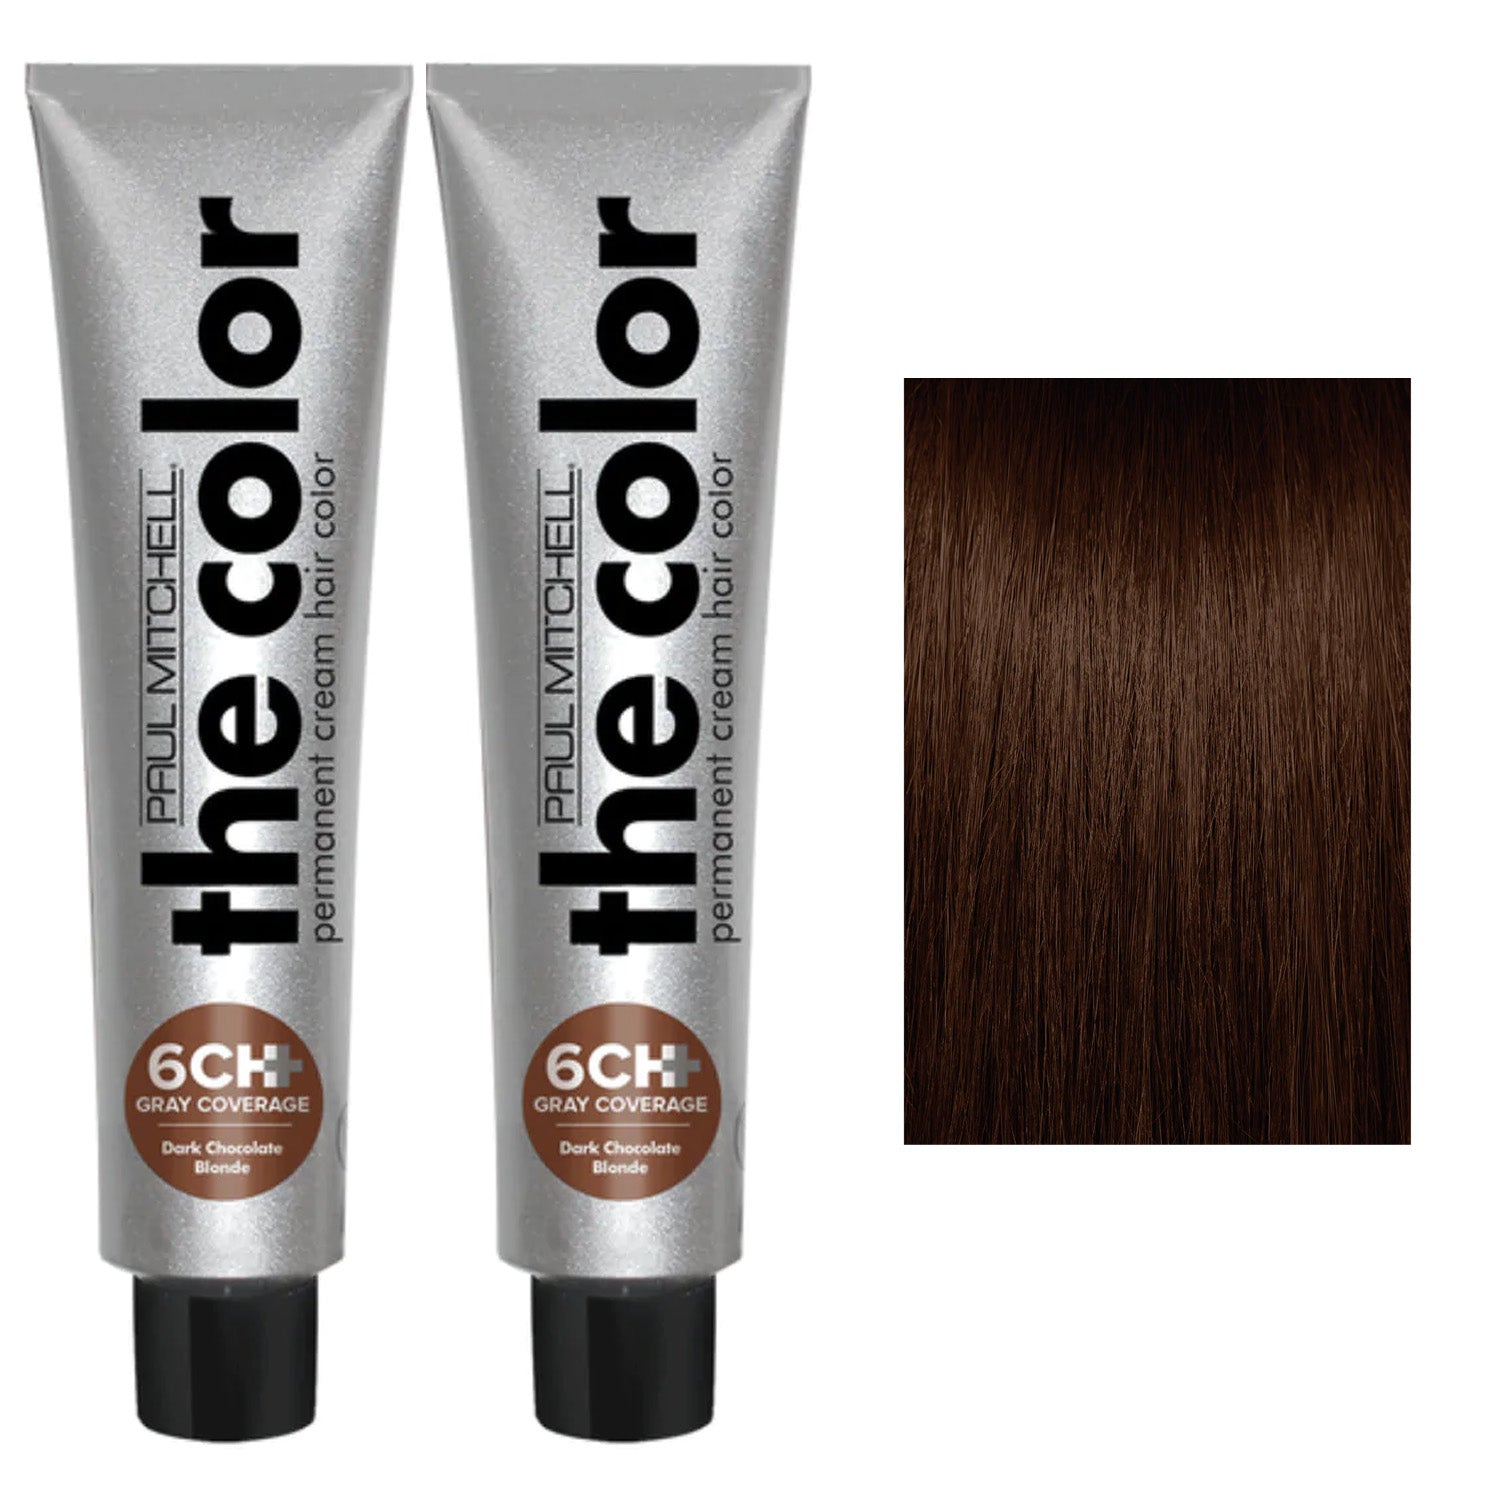 Paul Mitchell the Color Gray Coverage 6CH+ 3oz